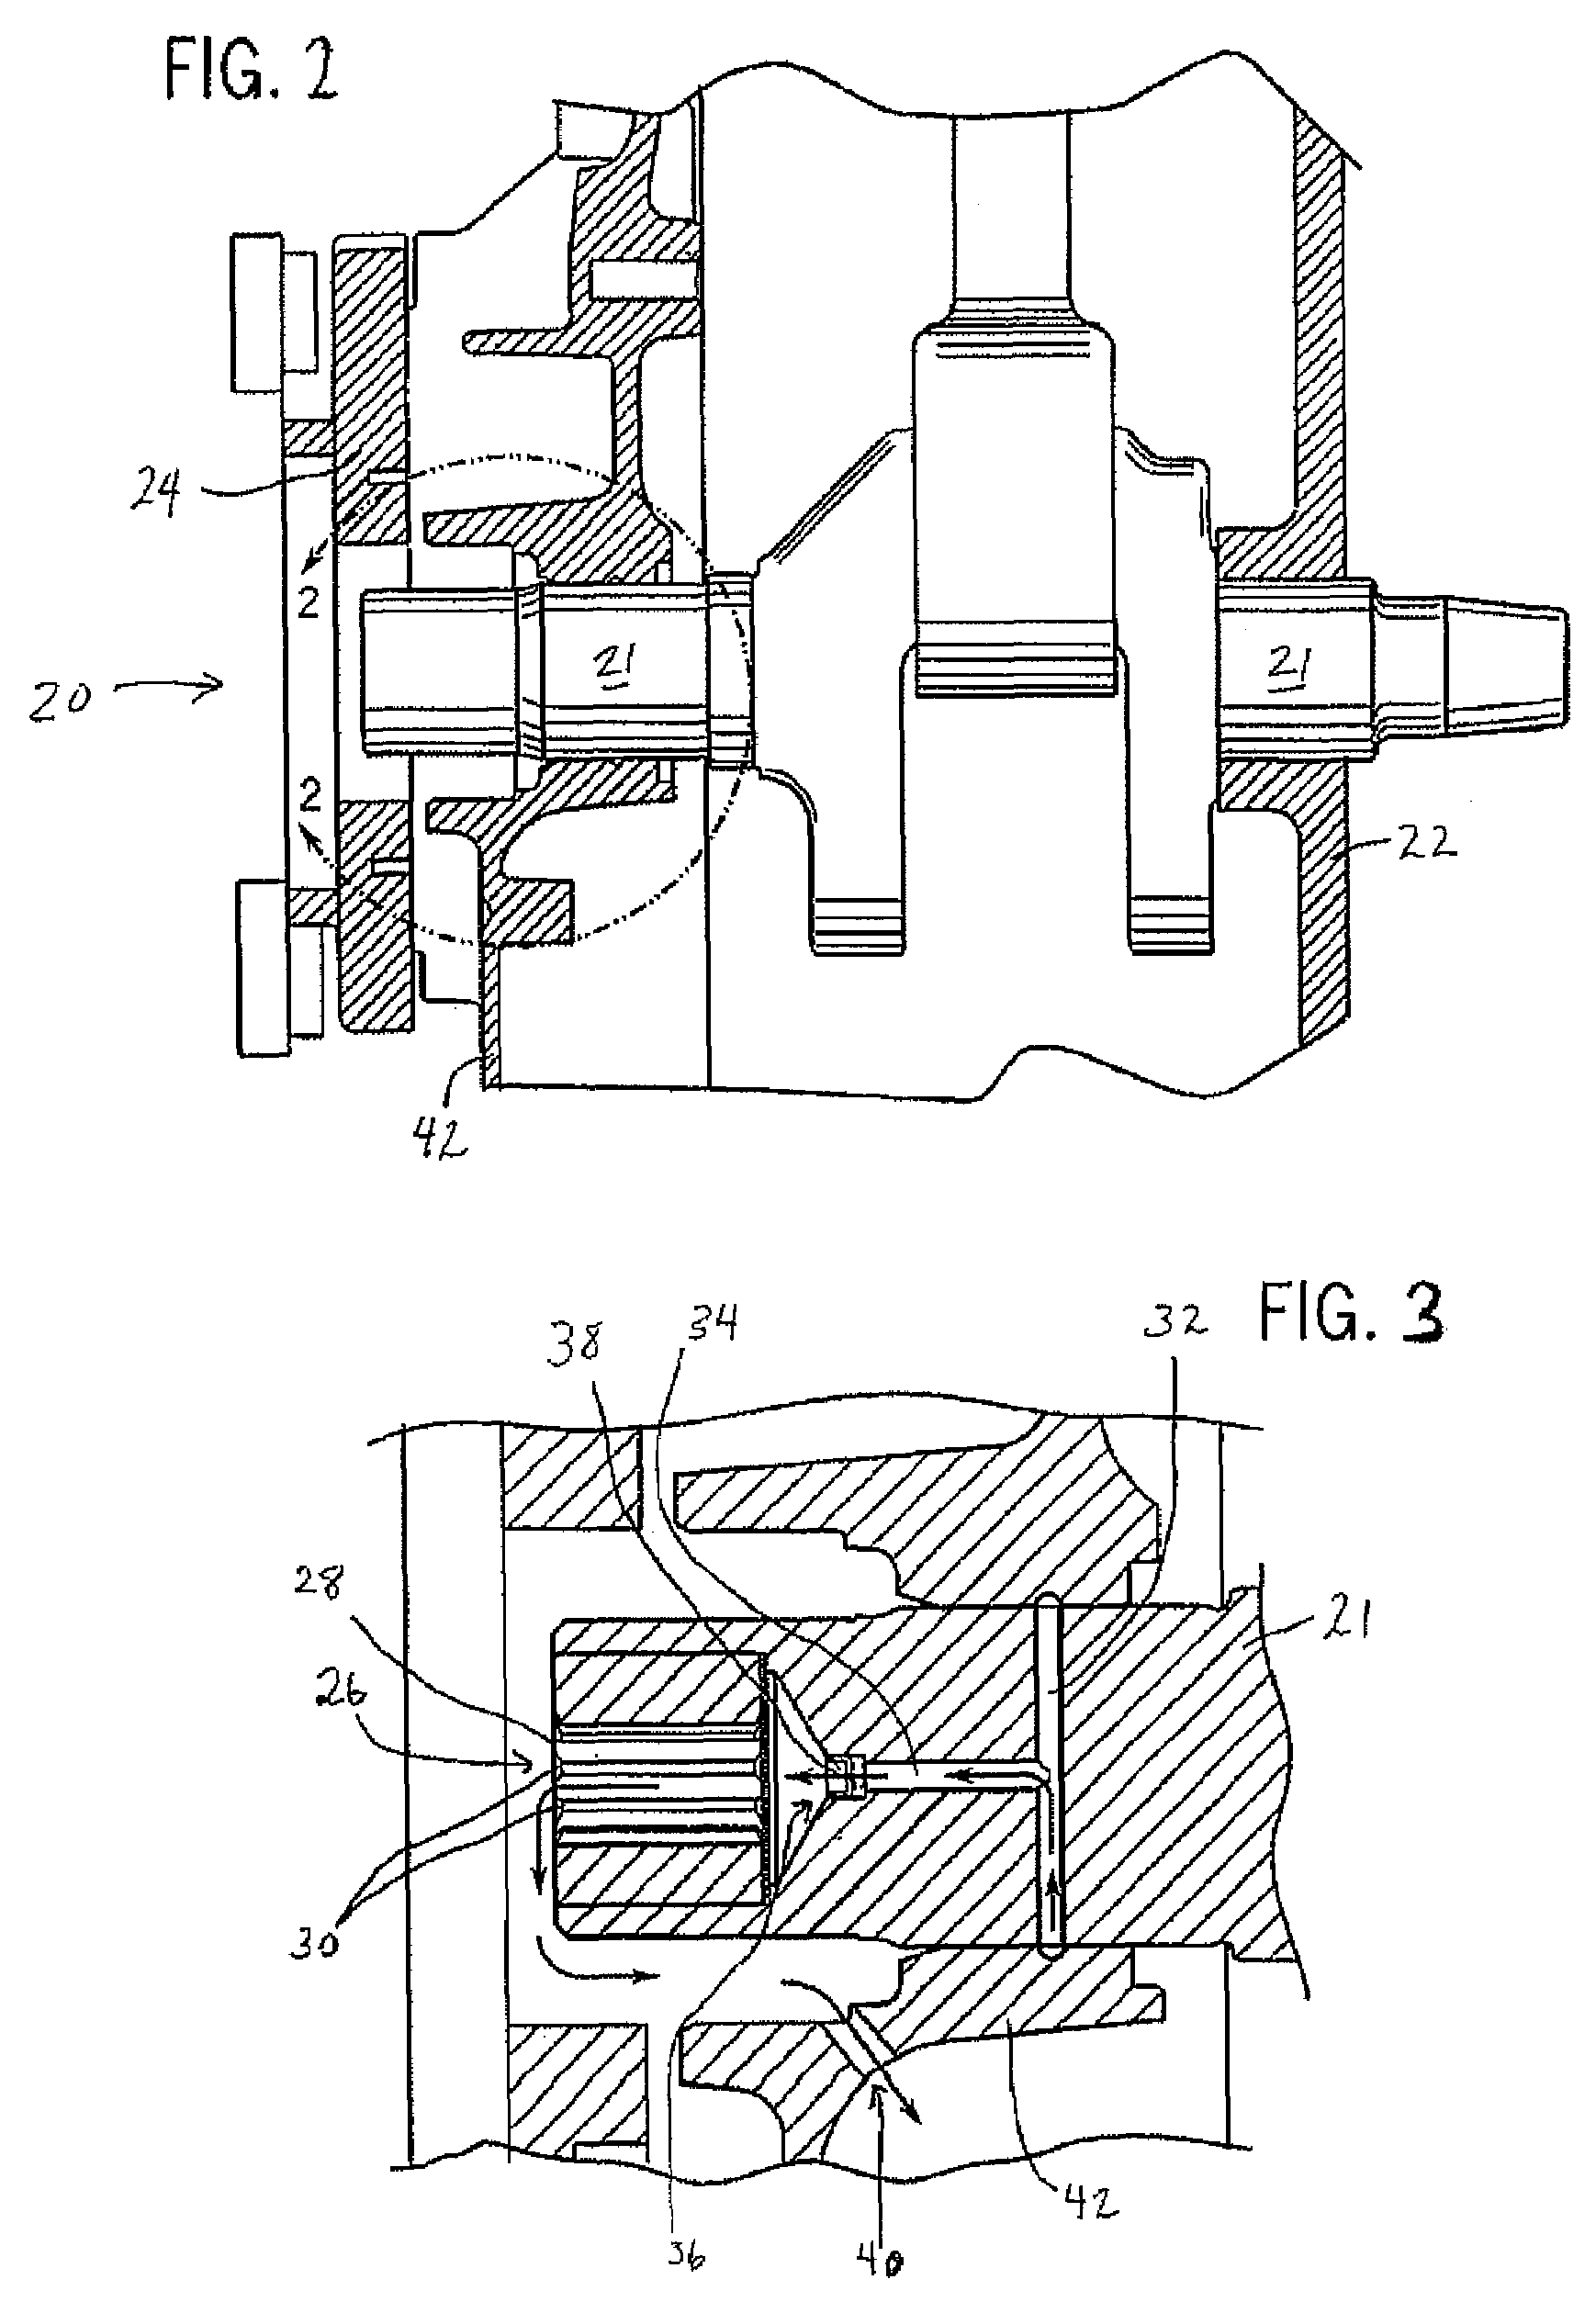 System and Method for Lubricating Power Transmitting Elements